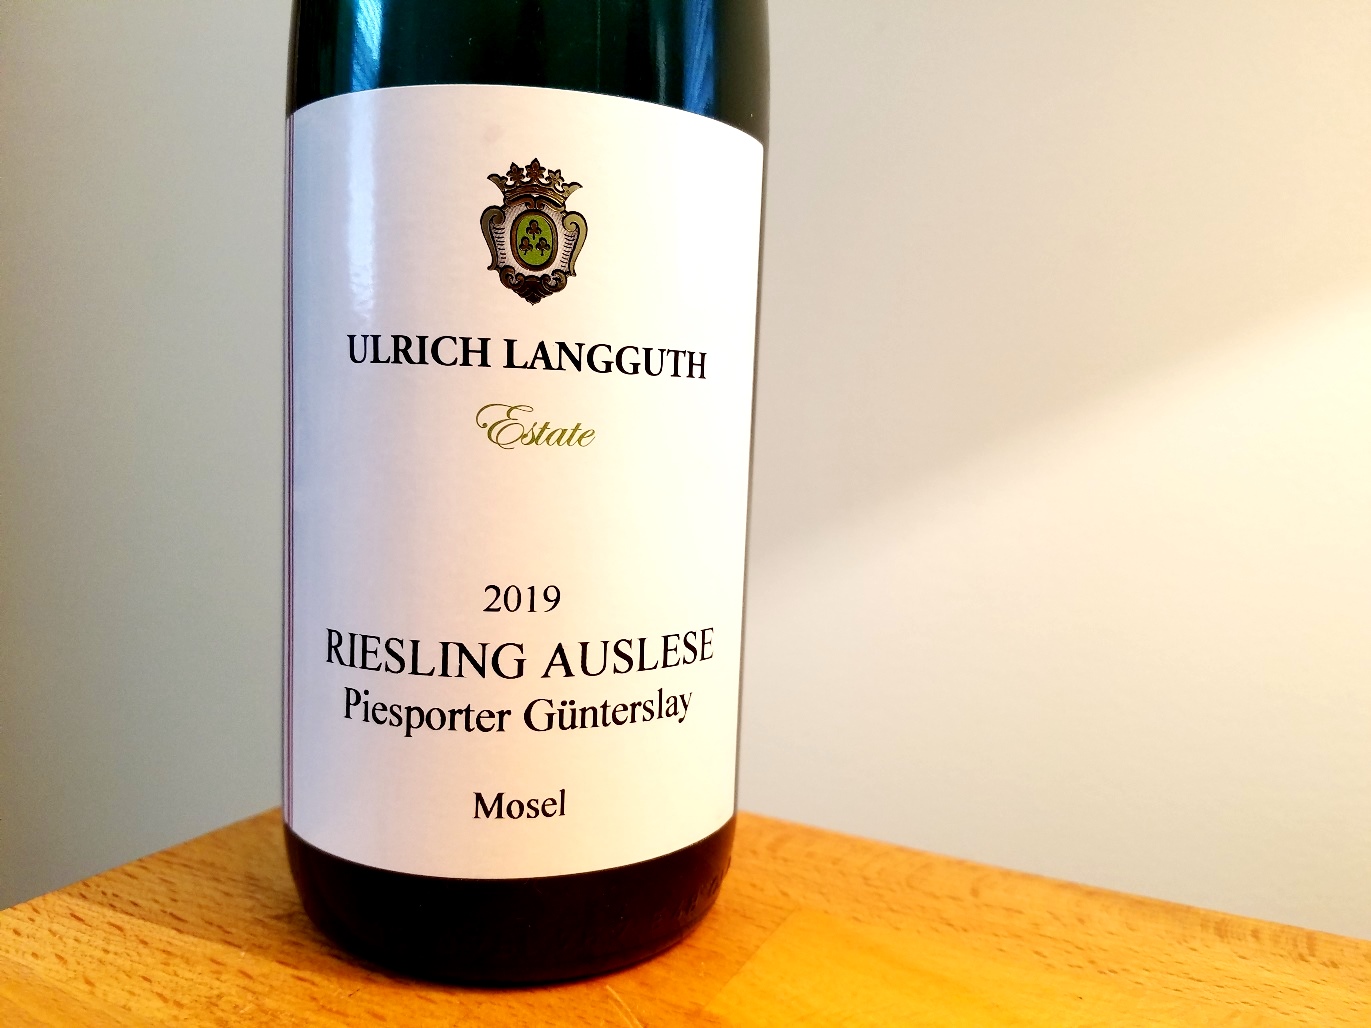 Ulrich Langguth, Piesporter Günterslay Auslese Riesling 2019, Mosel, Germany, Wine Casual